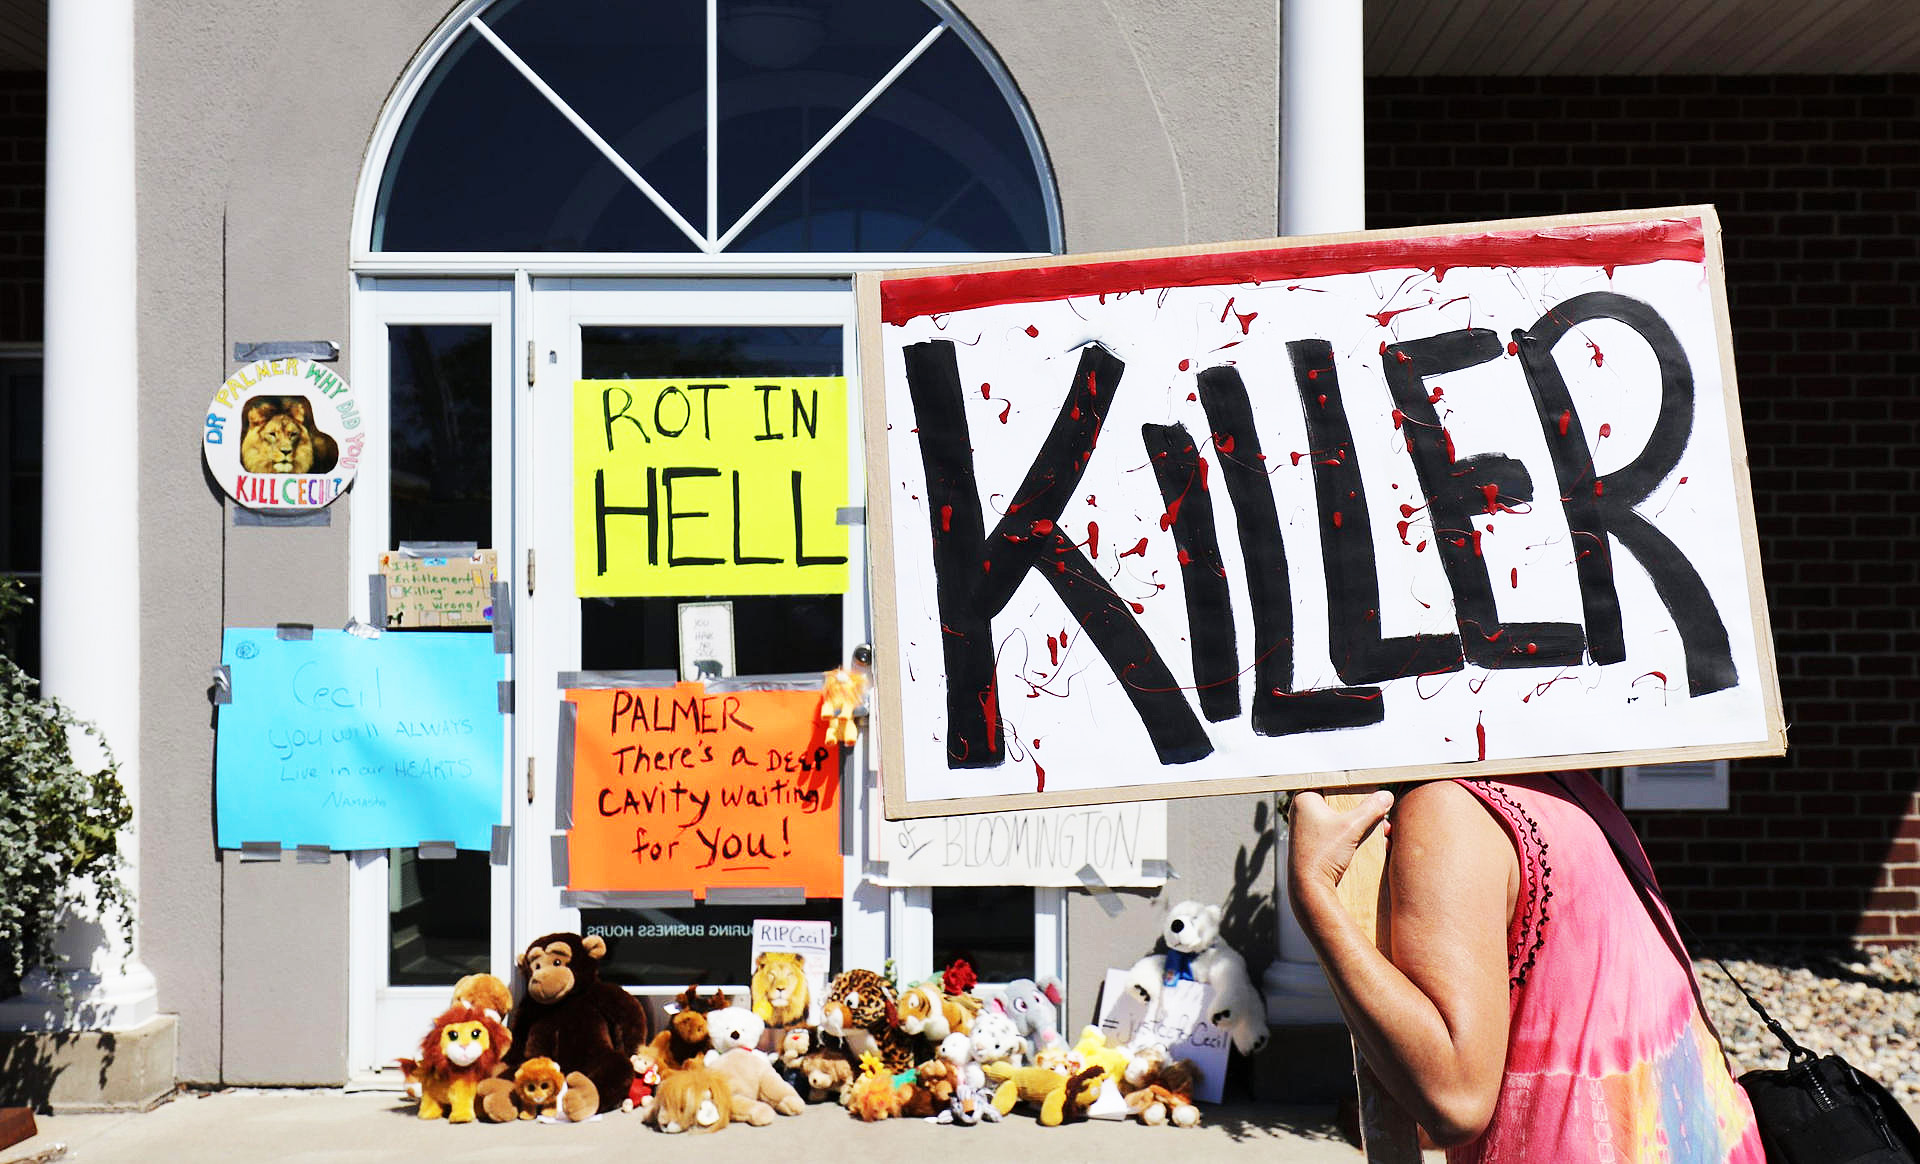 Changing attitudes as indicated in this BLOOMINGTON, MN picture taken outside Walter Palmer Dental Clinic. Adam Bettcher/Getty Images/AFP 